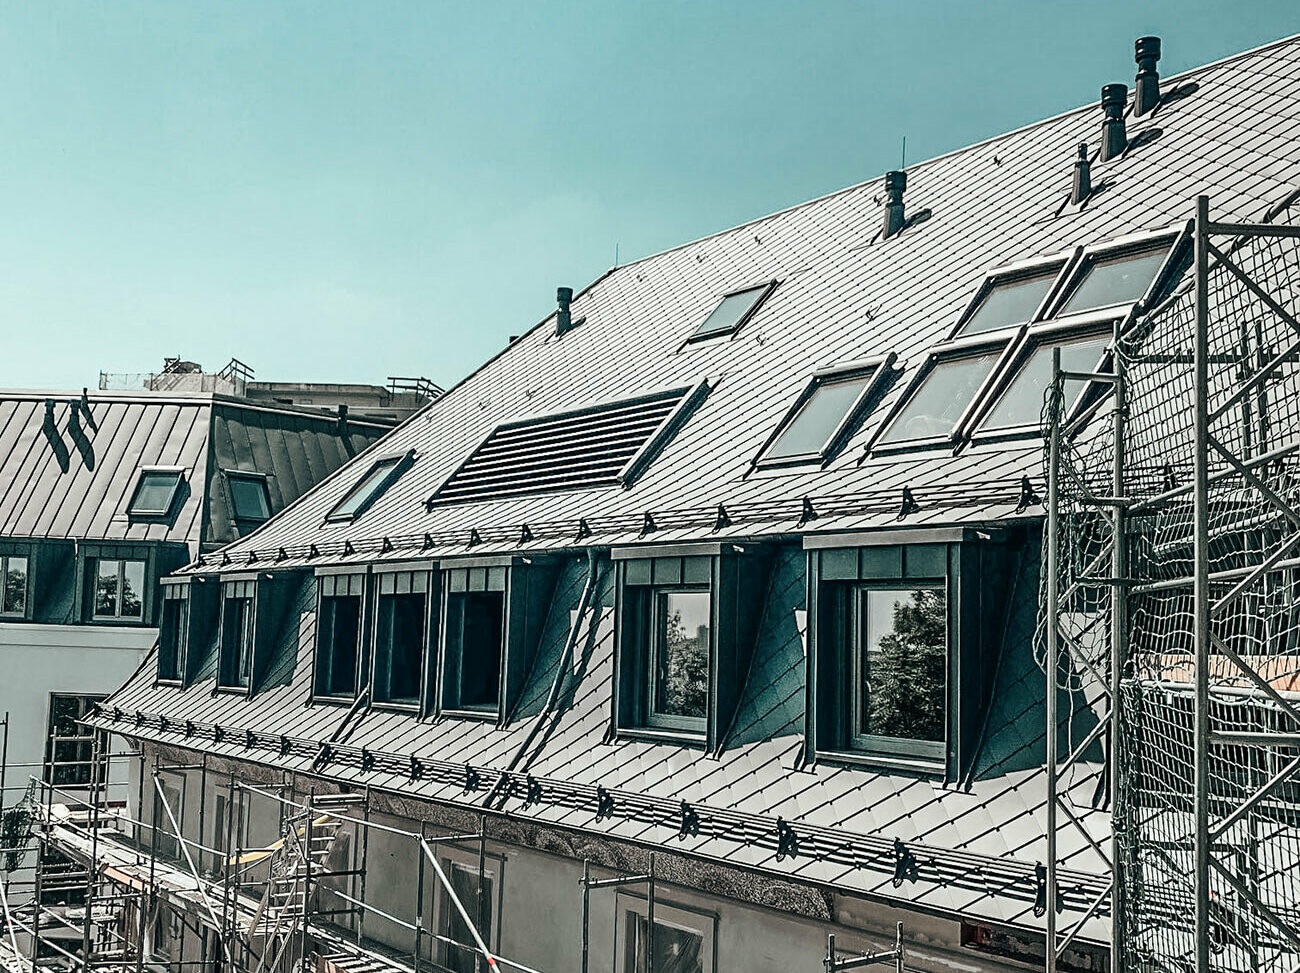 A shot of the roof of the Marie housing complex. The PREFA rhomboid façade tiles 29x29 in P.10 dark grey can be seen.